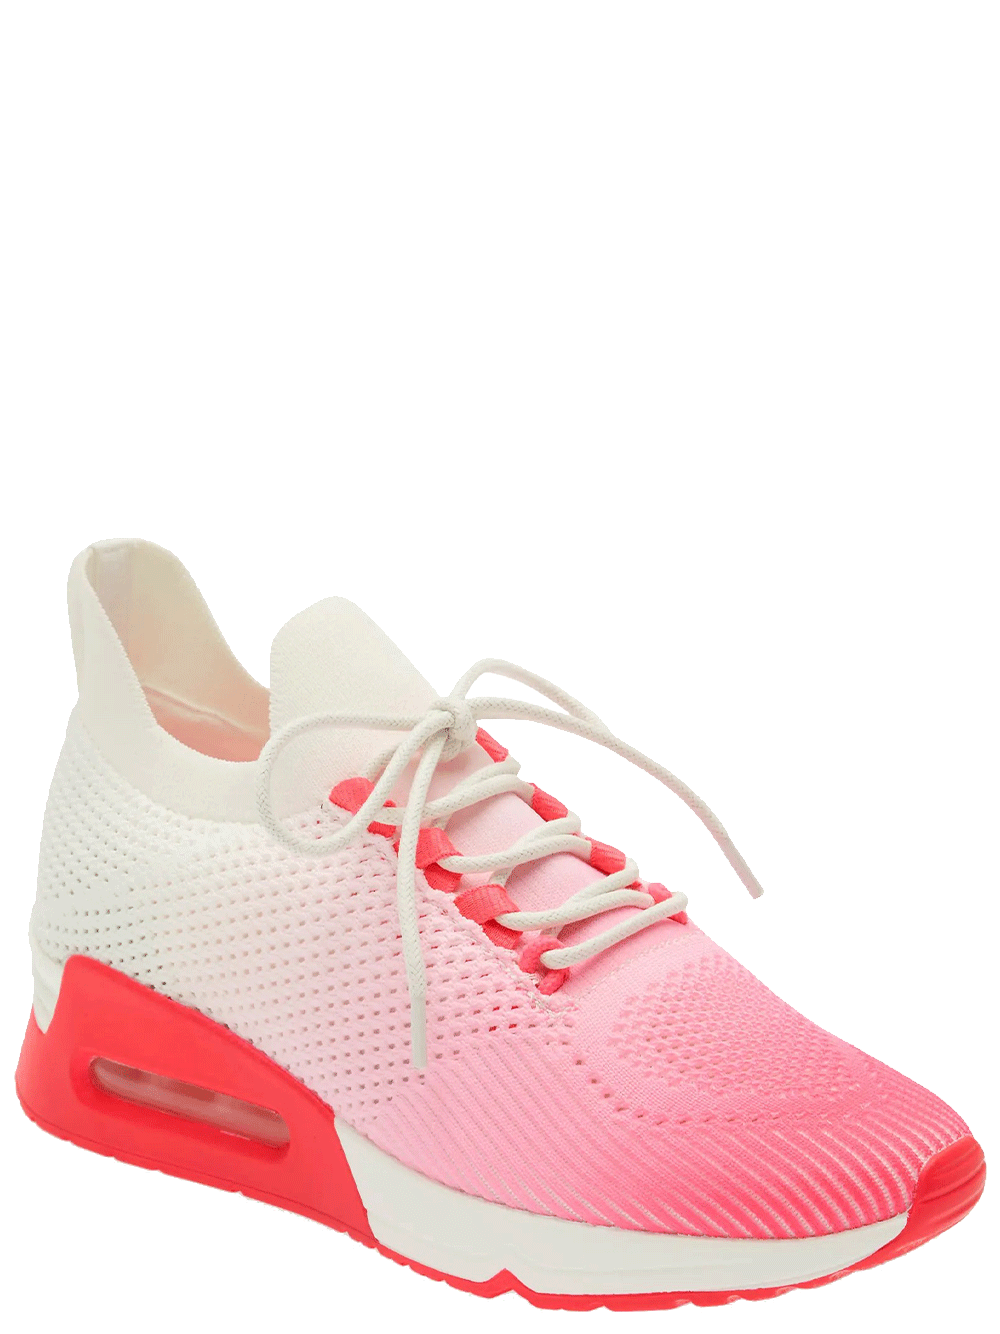 DKNY_Ashly-Lace-Up-Wedge-Sneaker-35MM_Pink-01